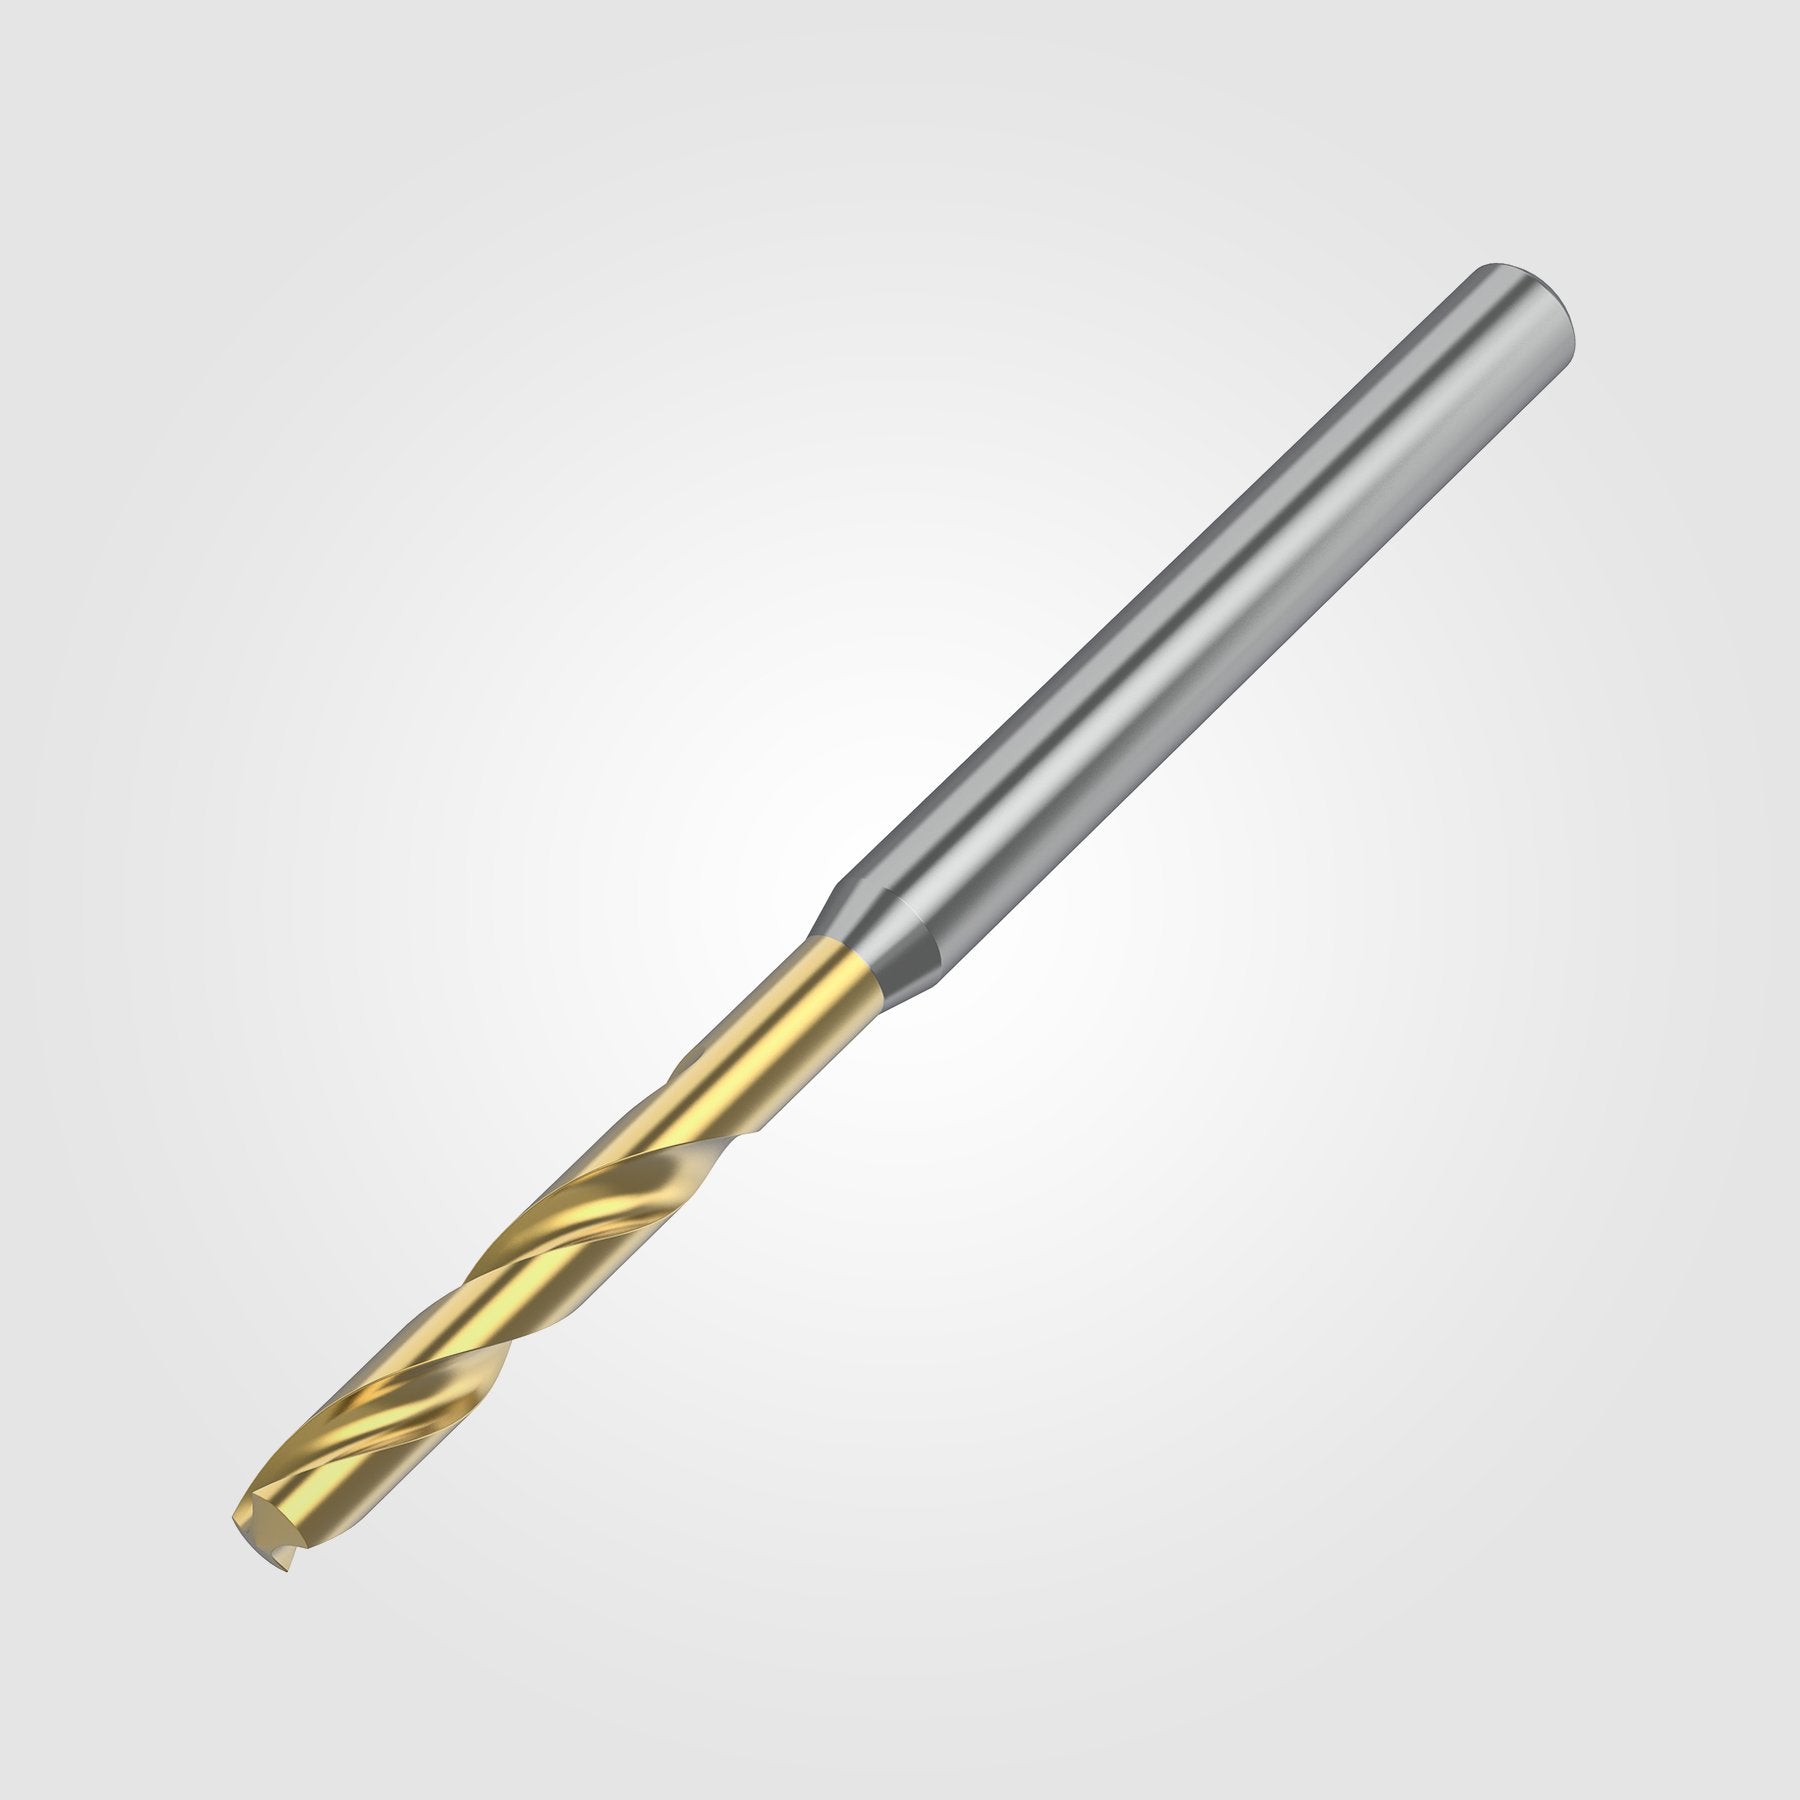 GOdrill (THROUGH COOLANT) | 7.7mm / .3031" / 3xD | SOLID CARBIDE DRILL | 4151171